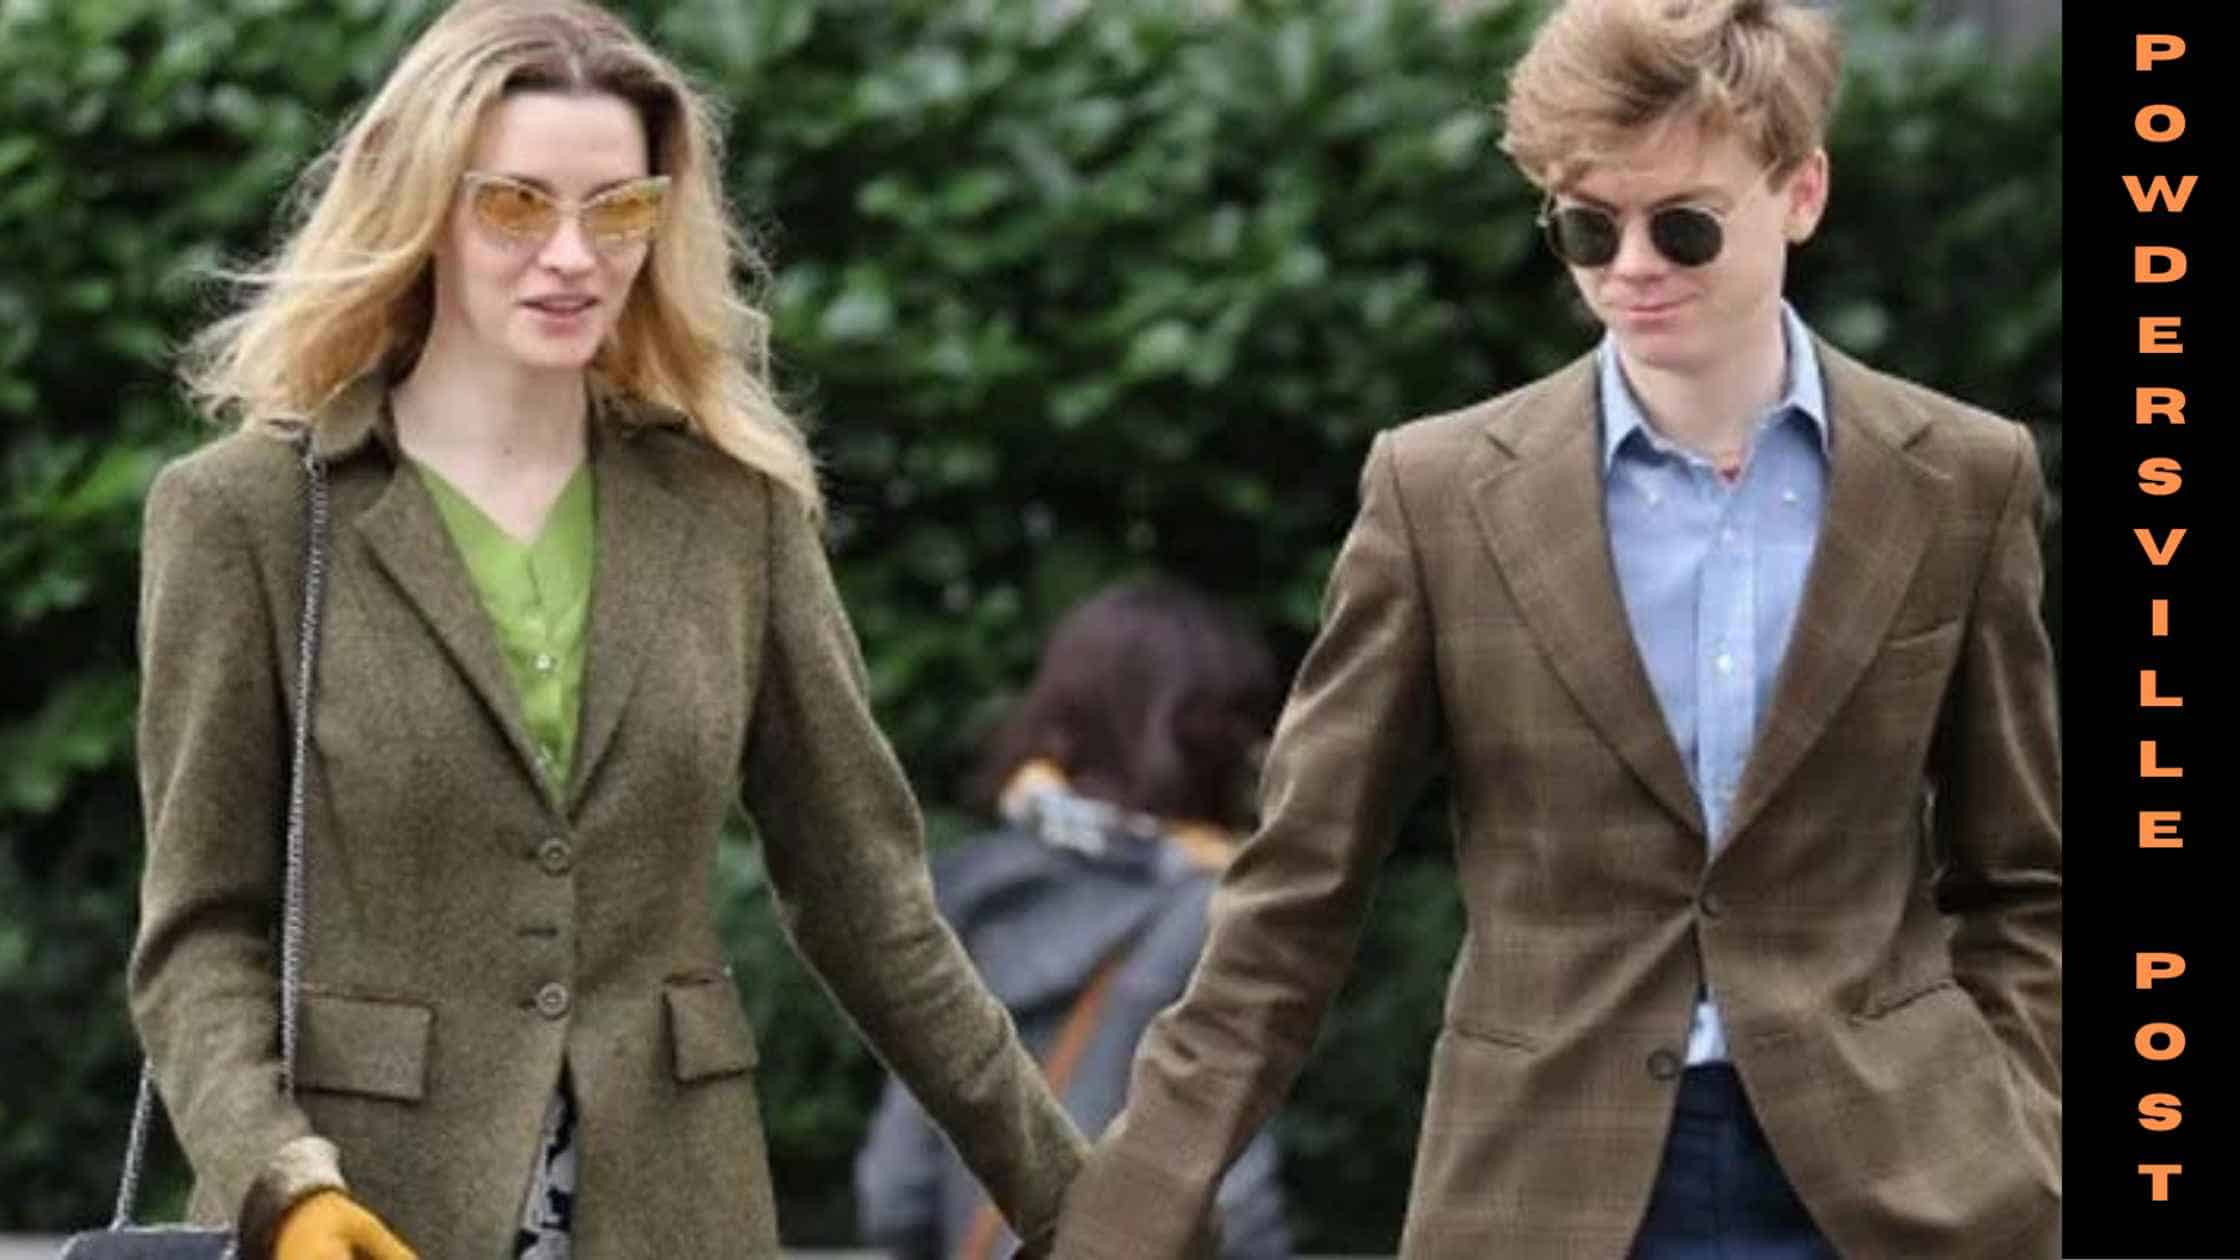 Elon Musk's Ex-Wife Talulah Riley Started Romantic Relationship With Game Of Thrones Star Thomas Brodie-Sangster